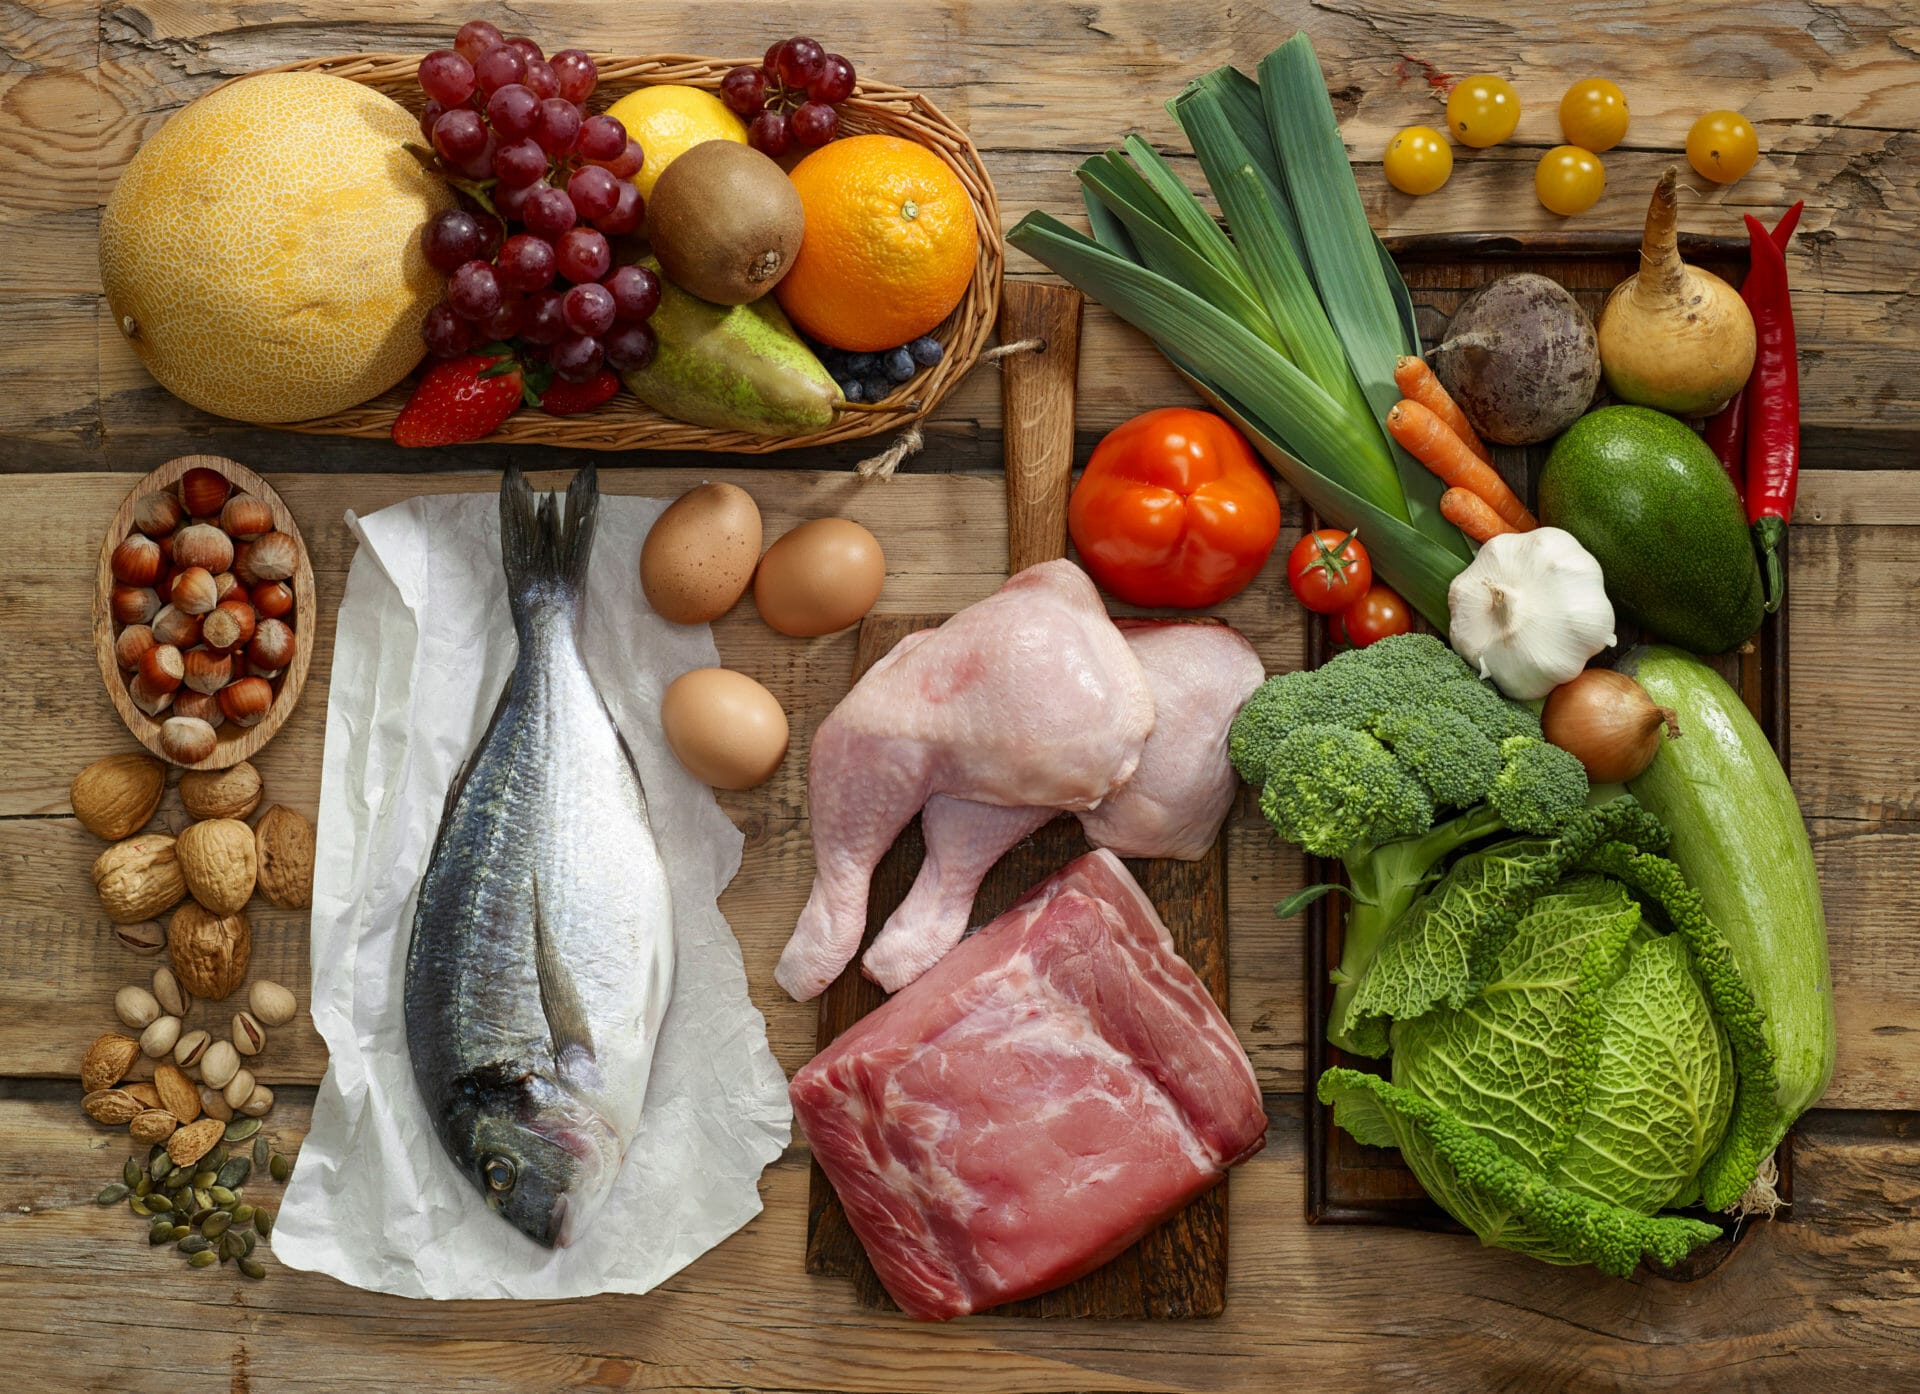 The paleo diet reduces inflammation and offers flexibility